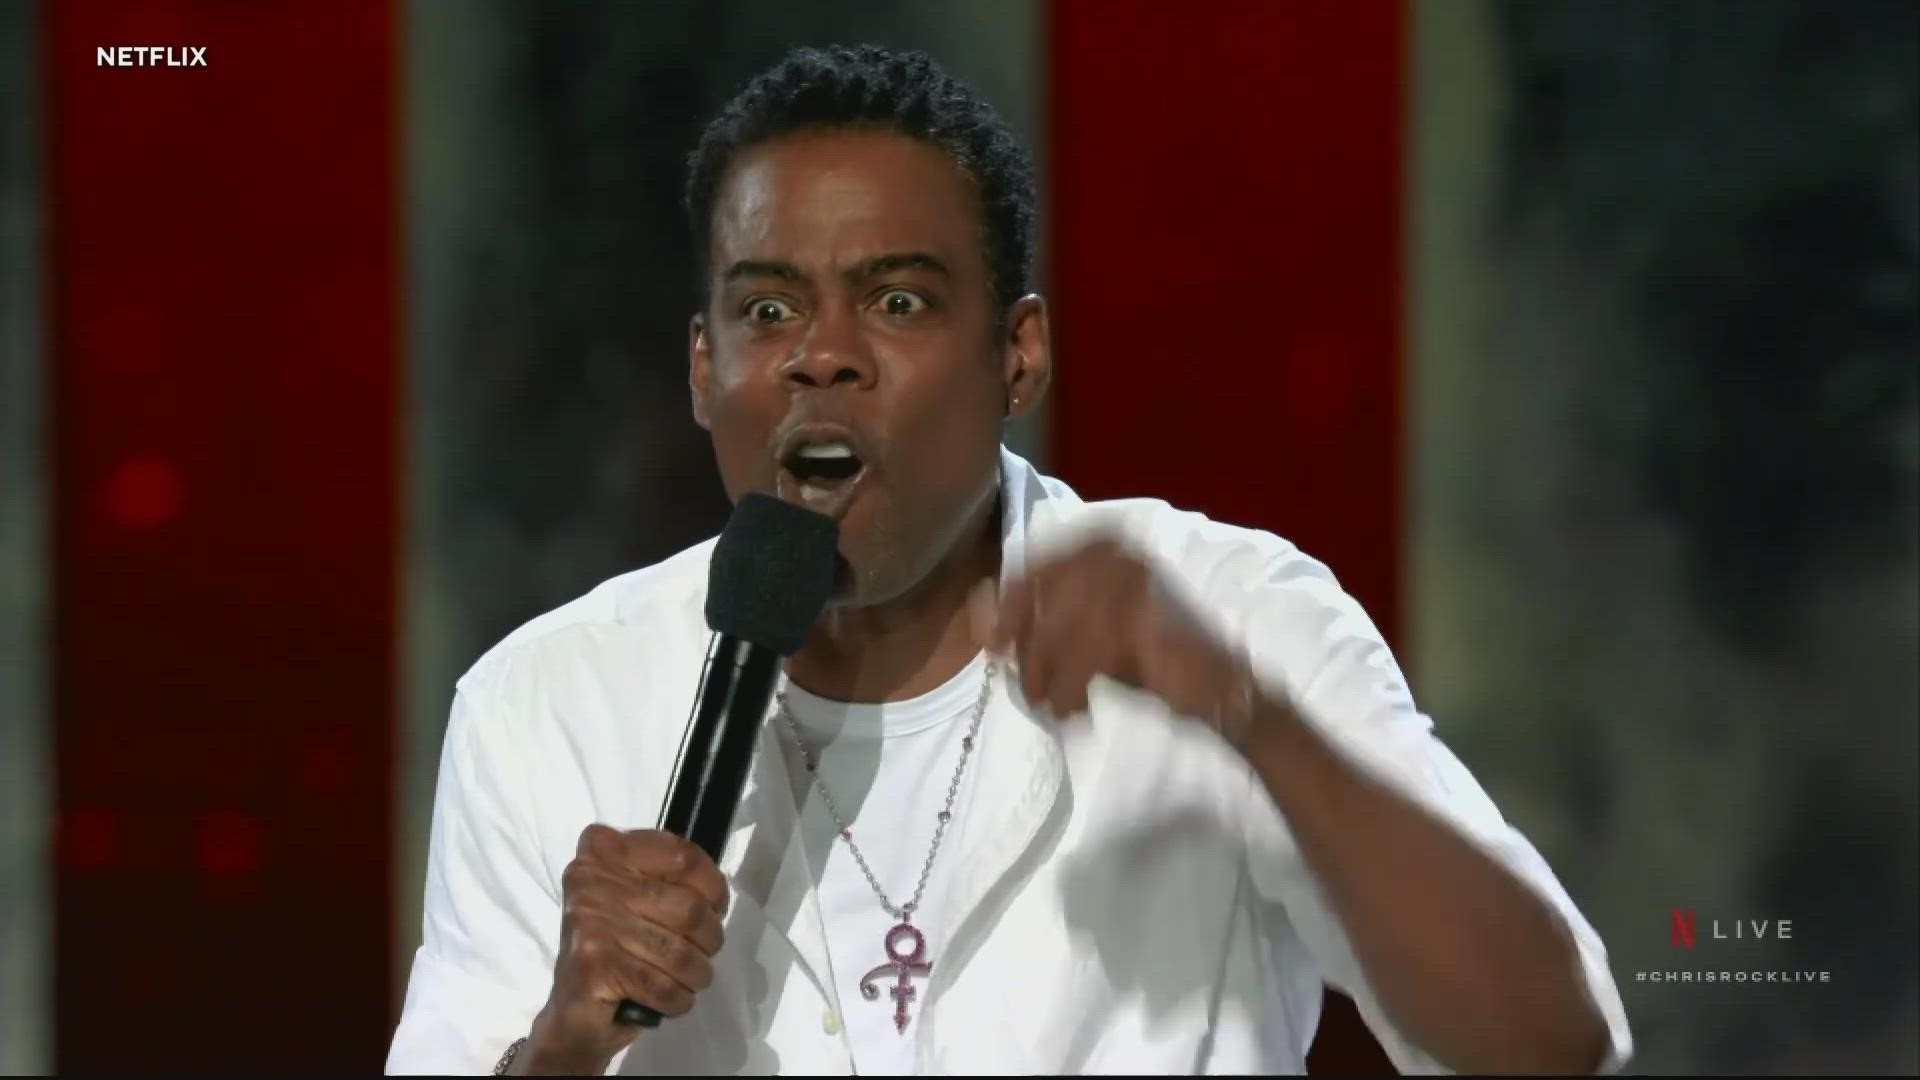 A year after Will Smith smacked him on the Academy Awards stage, Chris Rock finally gave his rebuttal in a forceful stand-up special.